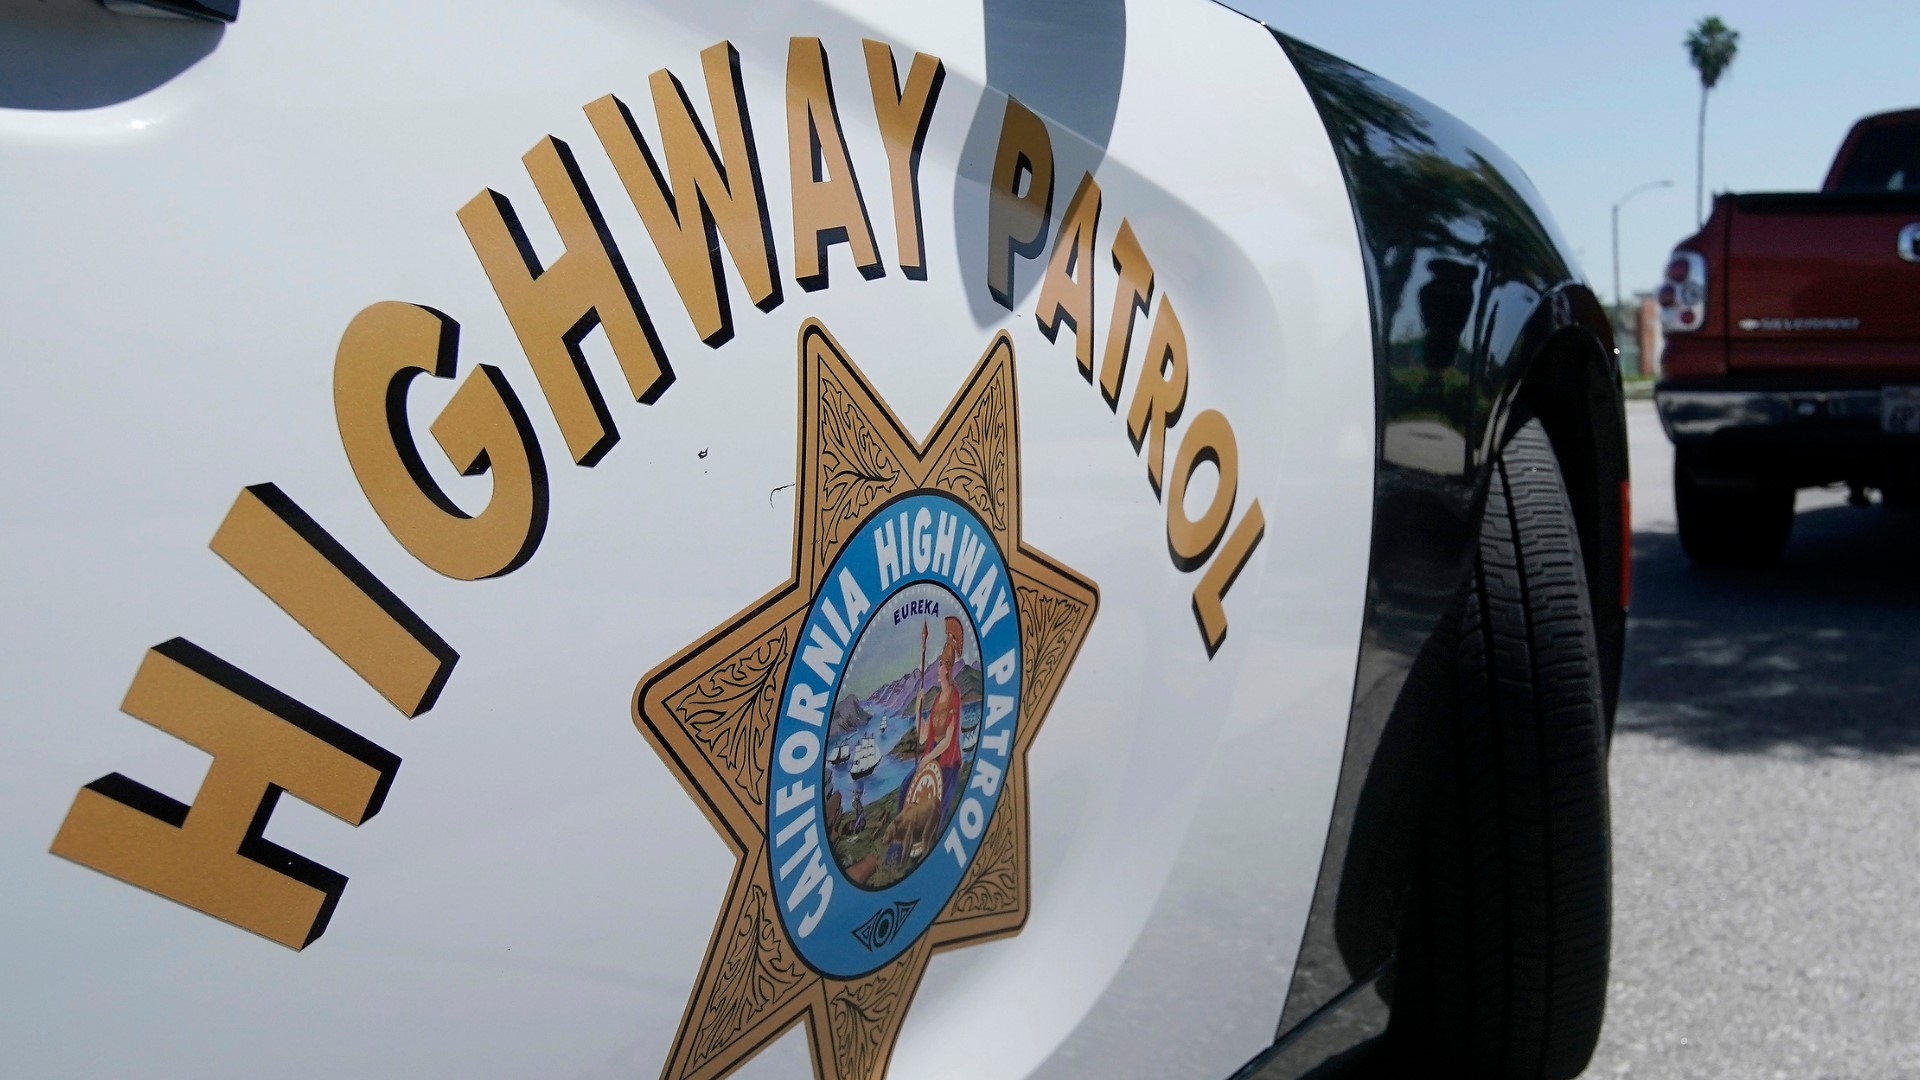 CHP officials said two people are dead after a Dodge Durango overturned, ejecting two passengers, while they were driving off-road, CHP officials said.